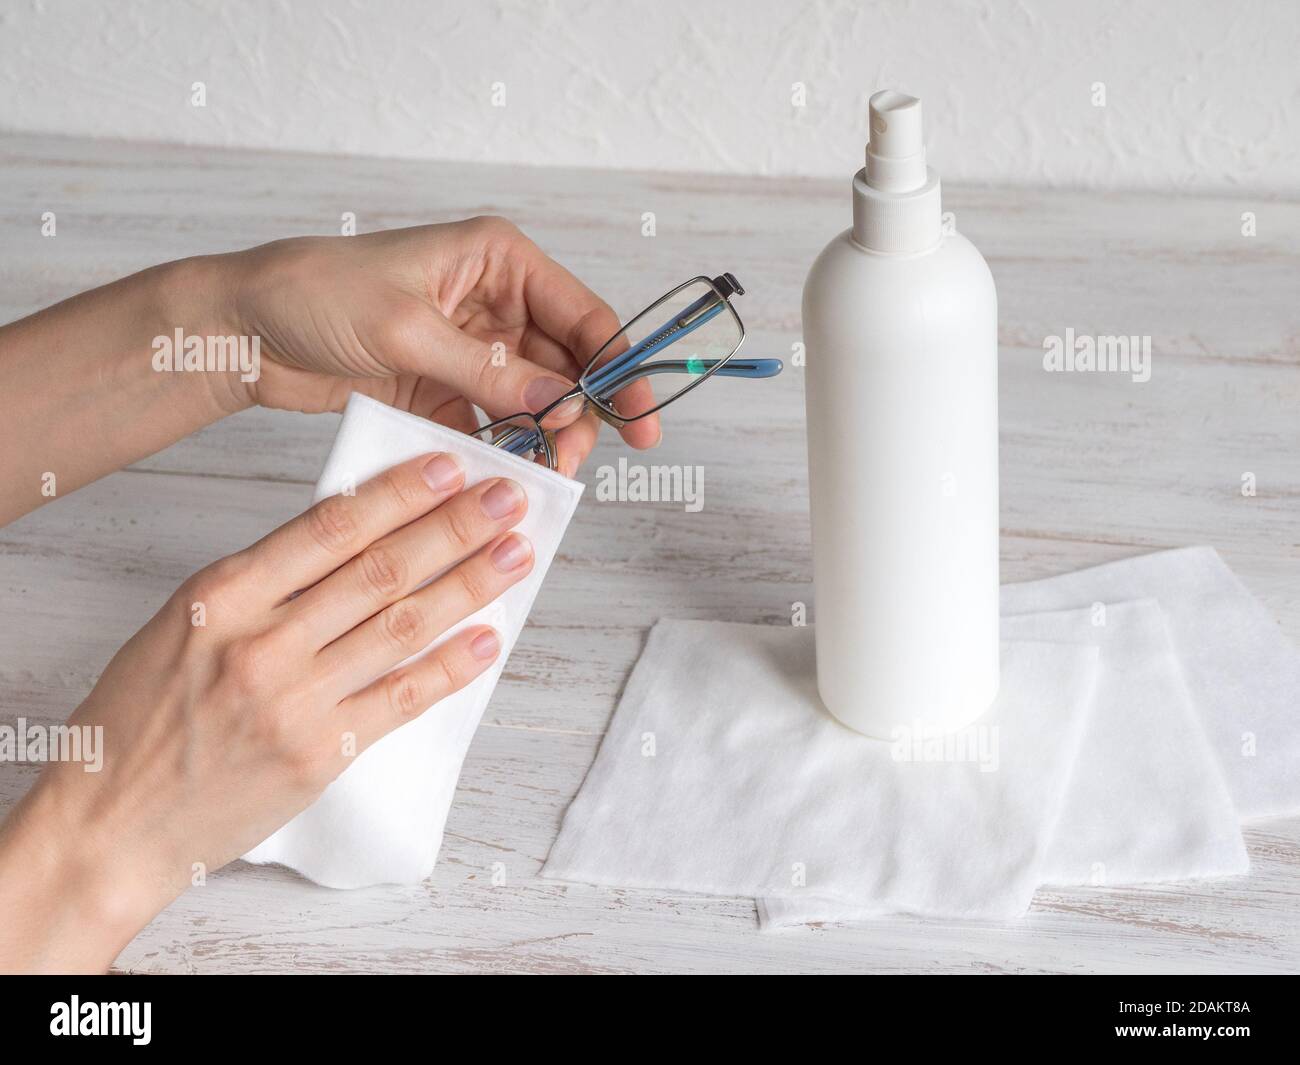 Woman hand wiping glasses with disinfectant wipes due to corona virus pandemic. Stock Photo